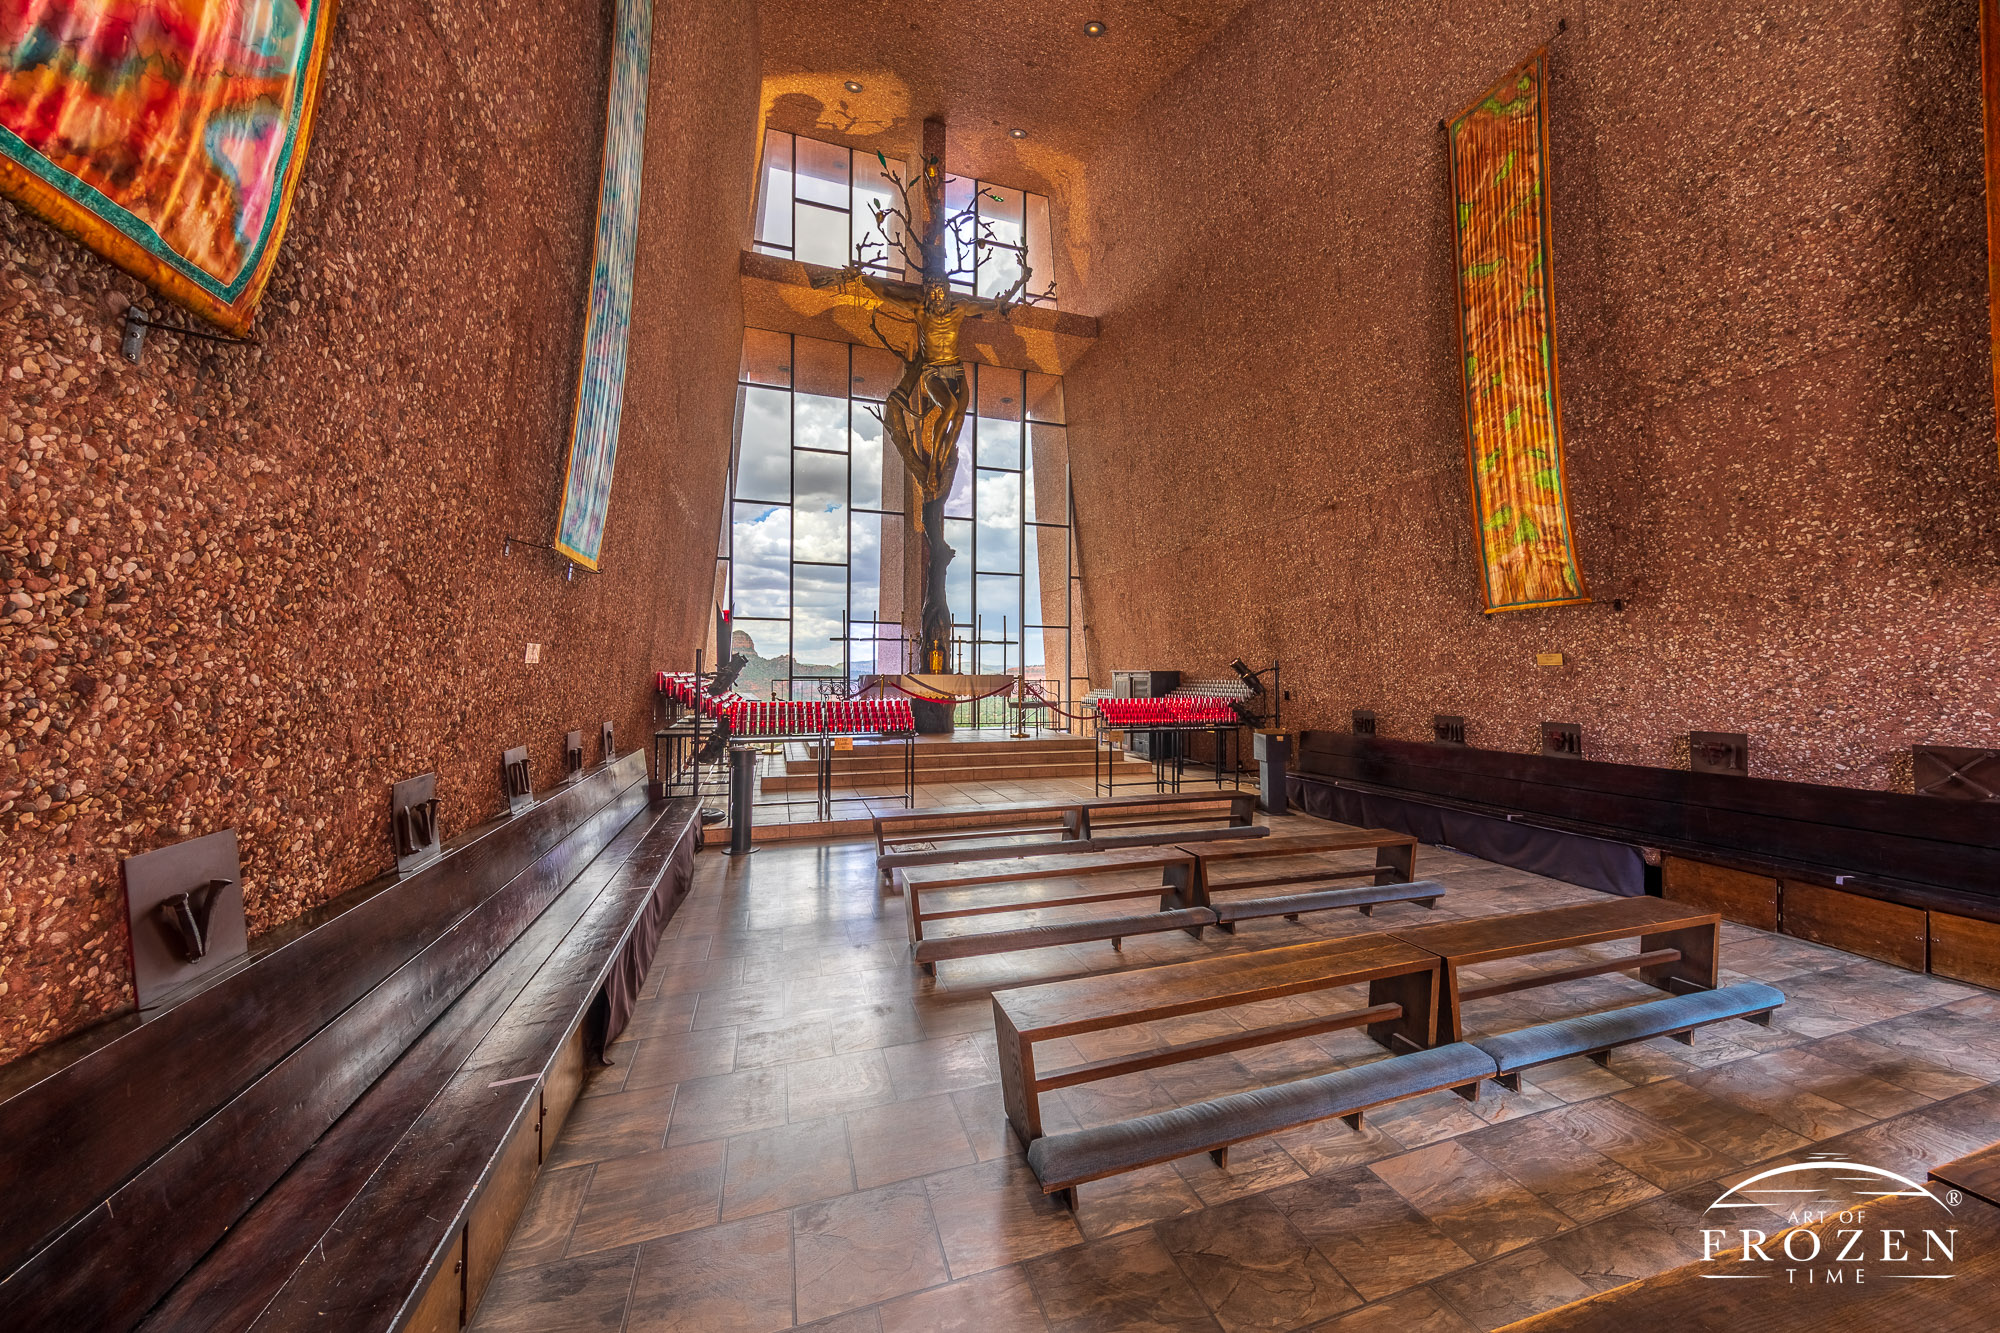 A wide-angle view of the Chapel of the Holy Cross interior revealing its textured walls leading the eye towards the church’s rear glass windows.